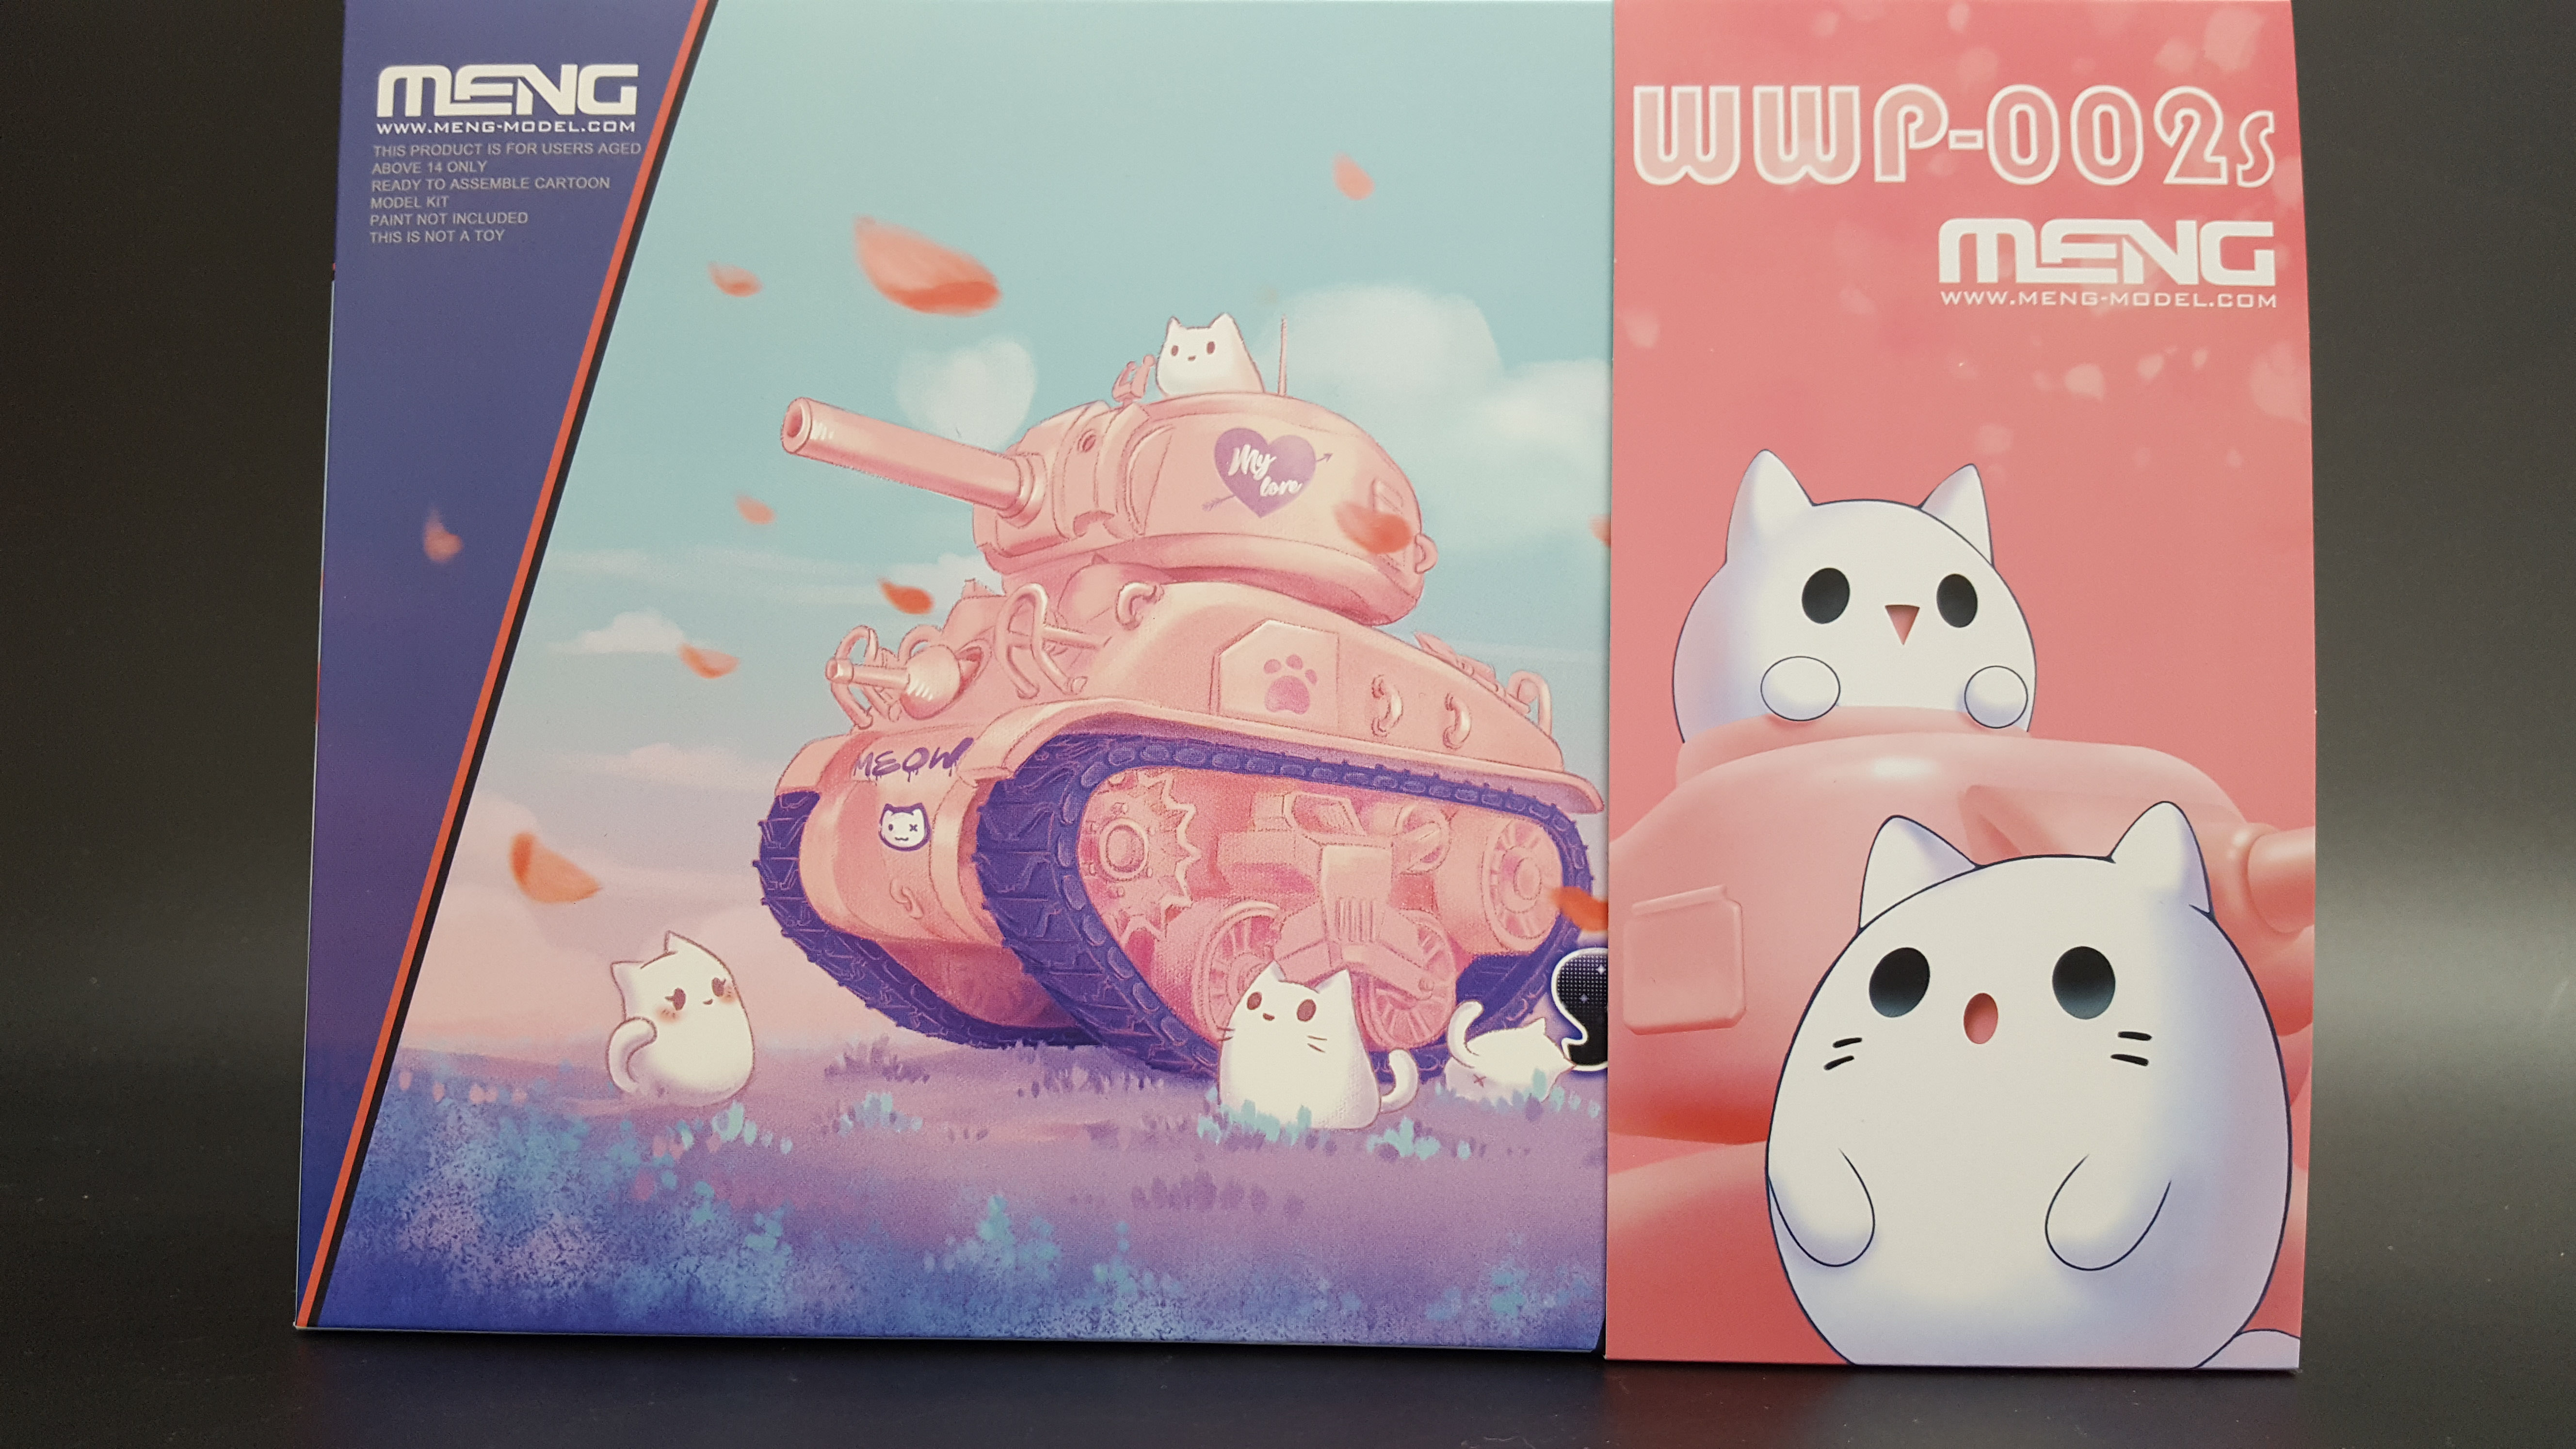 pinky world war toons m4a1 sherman (pink color)